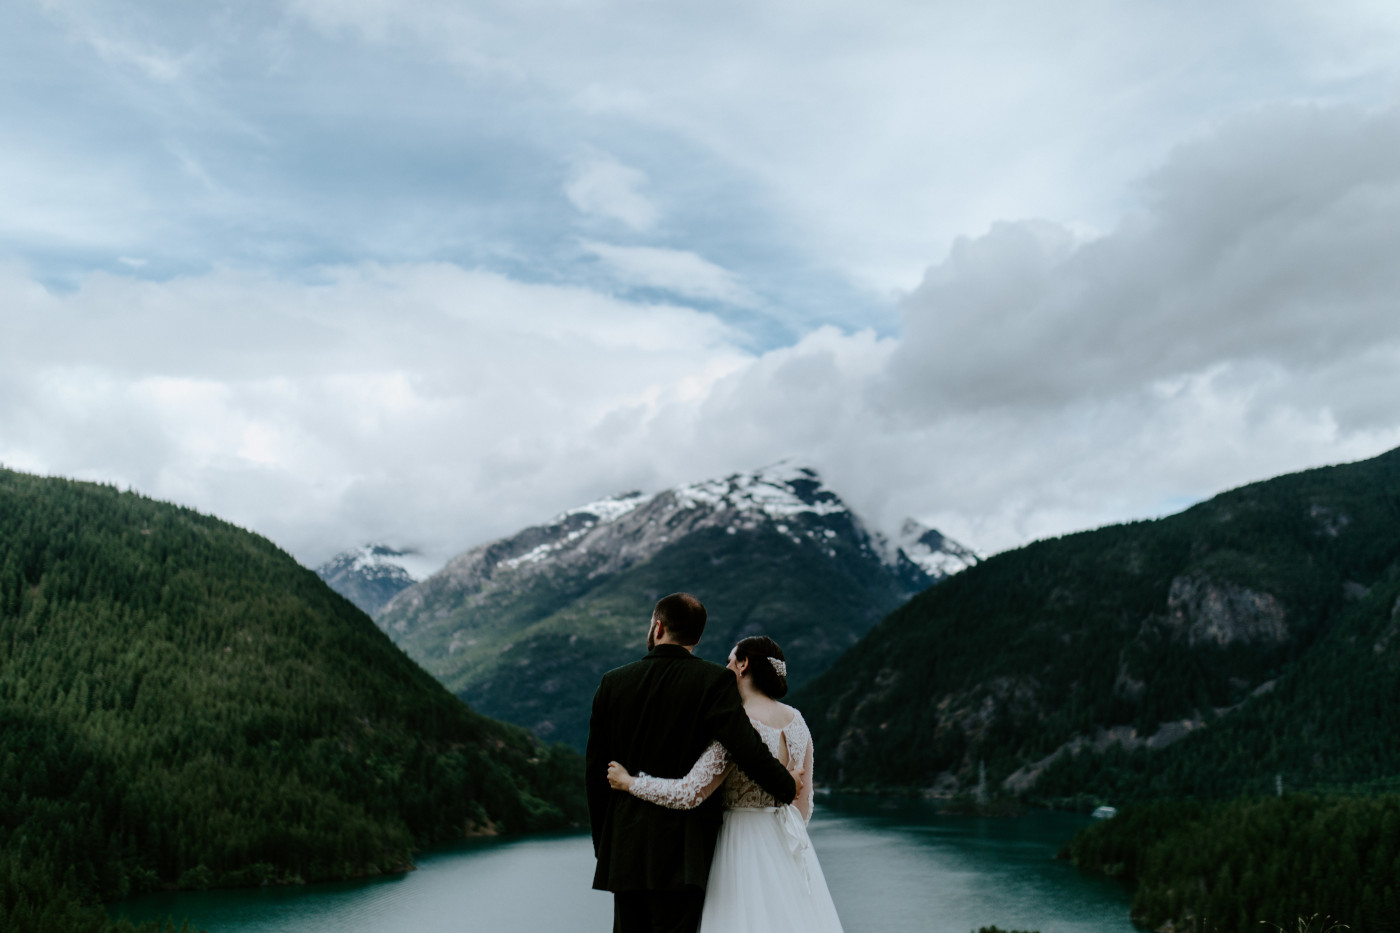 Alex and Elizabeth look out onto Diablo Lake Overlook. Elopement photography at North Cascades National Park by Sienna Plus Josh.